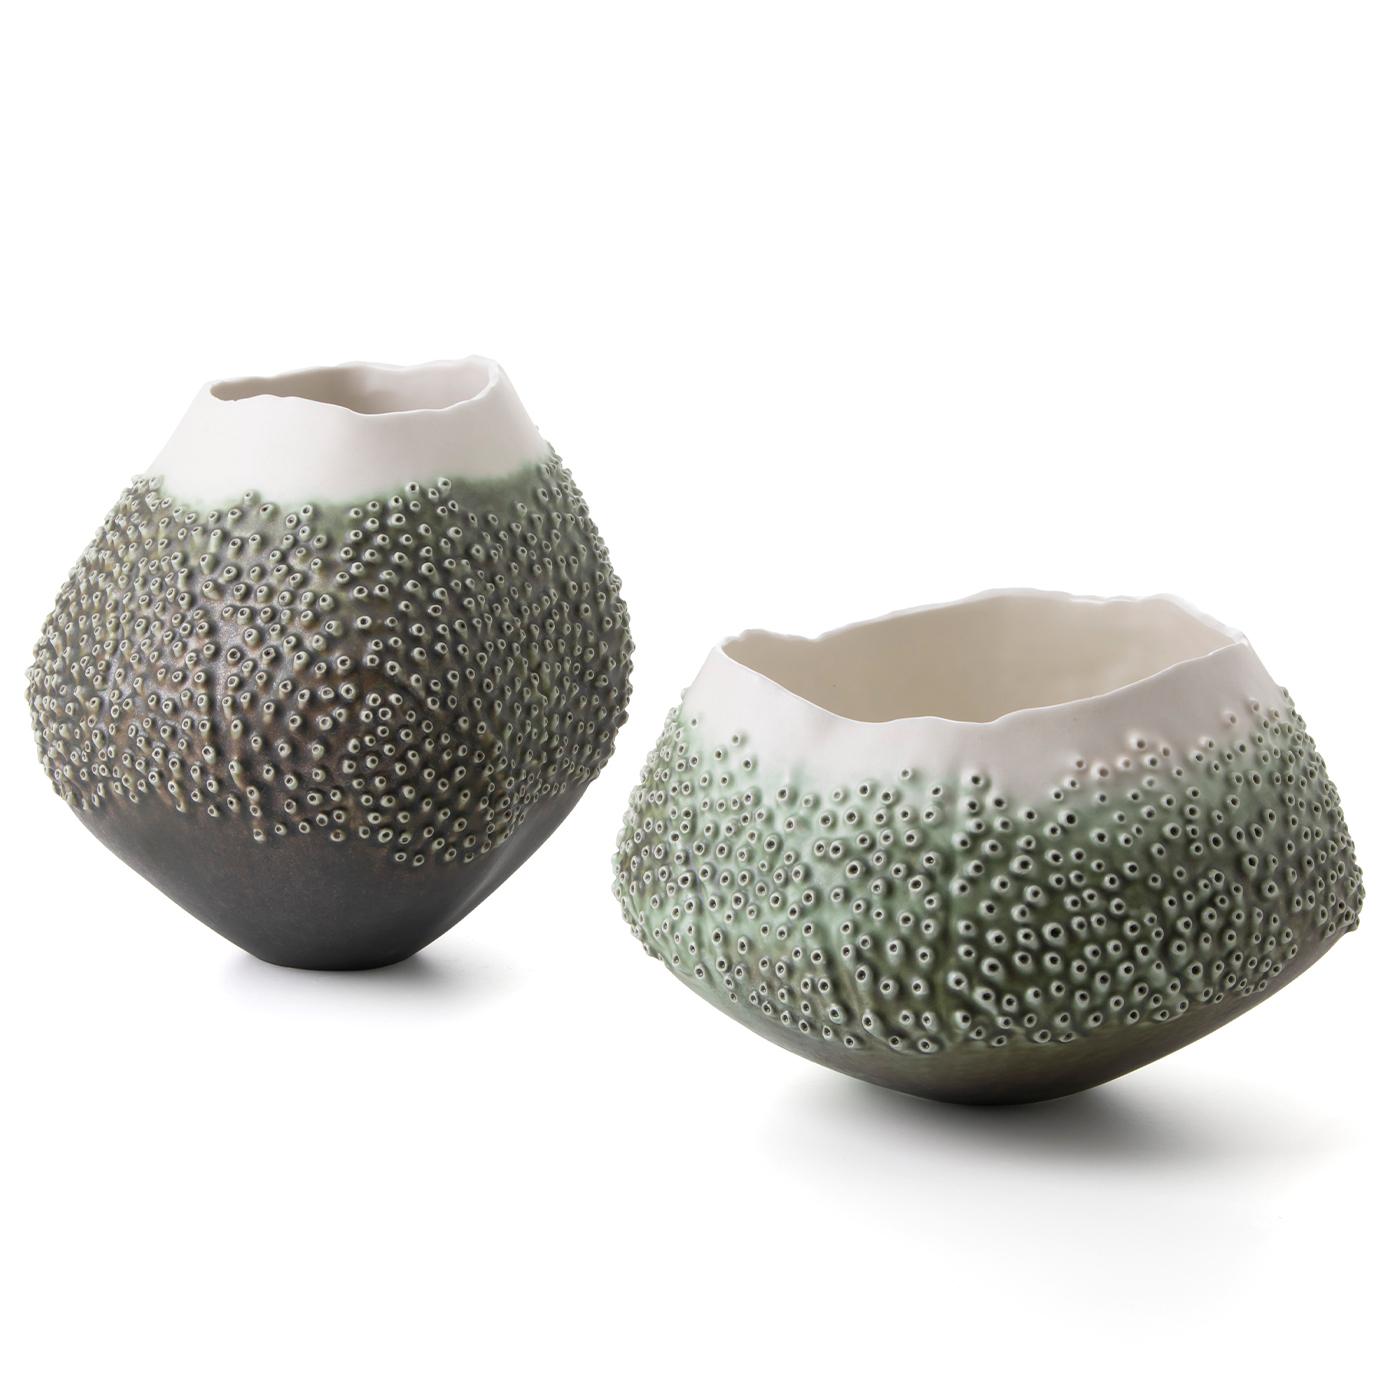 Oceania is a porcelain vase, part of the Porifera Collection, a hymn to the beauty of the marine world, with a myriad of tiny holes. The texture, inspired by corals, celebrates the Ocean, astonishing for the exotic shapes of its creatures. Each